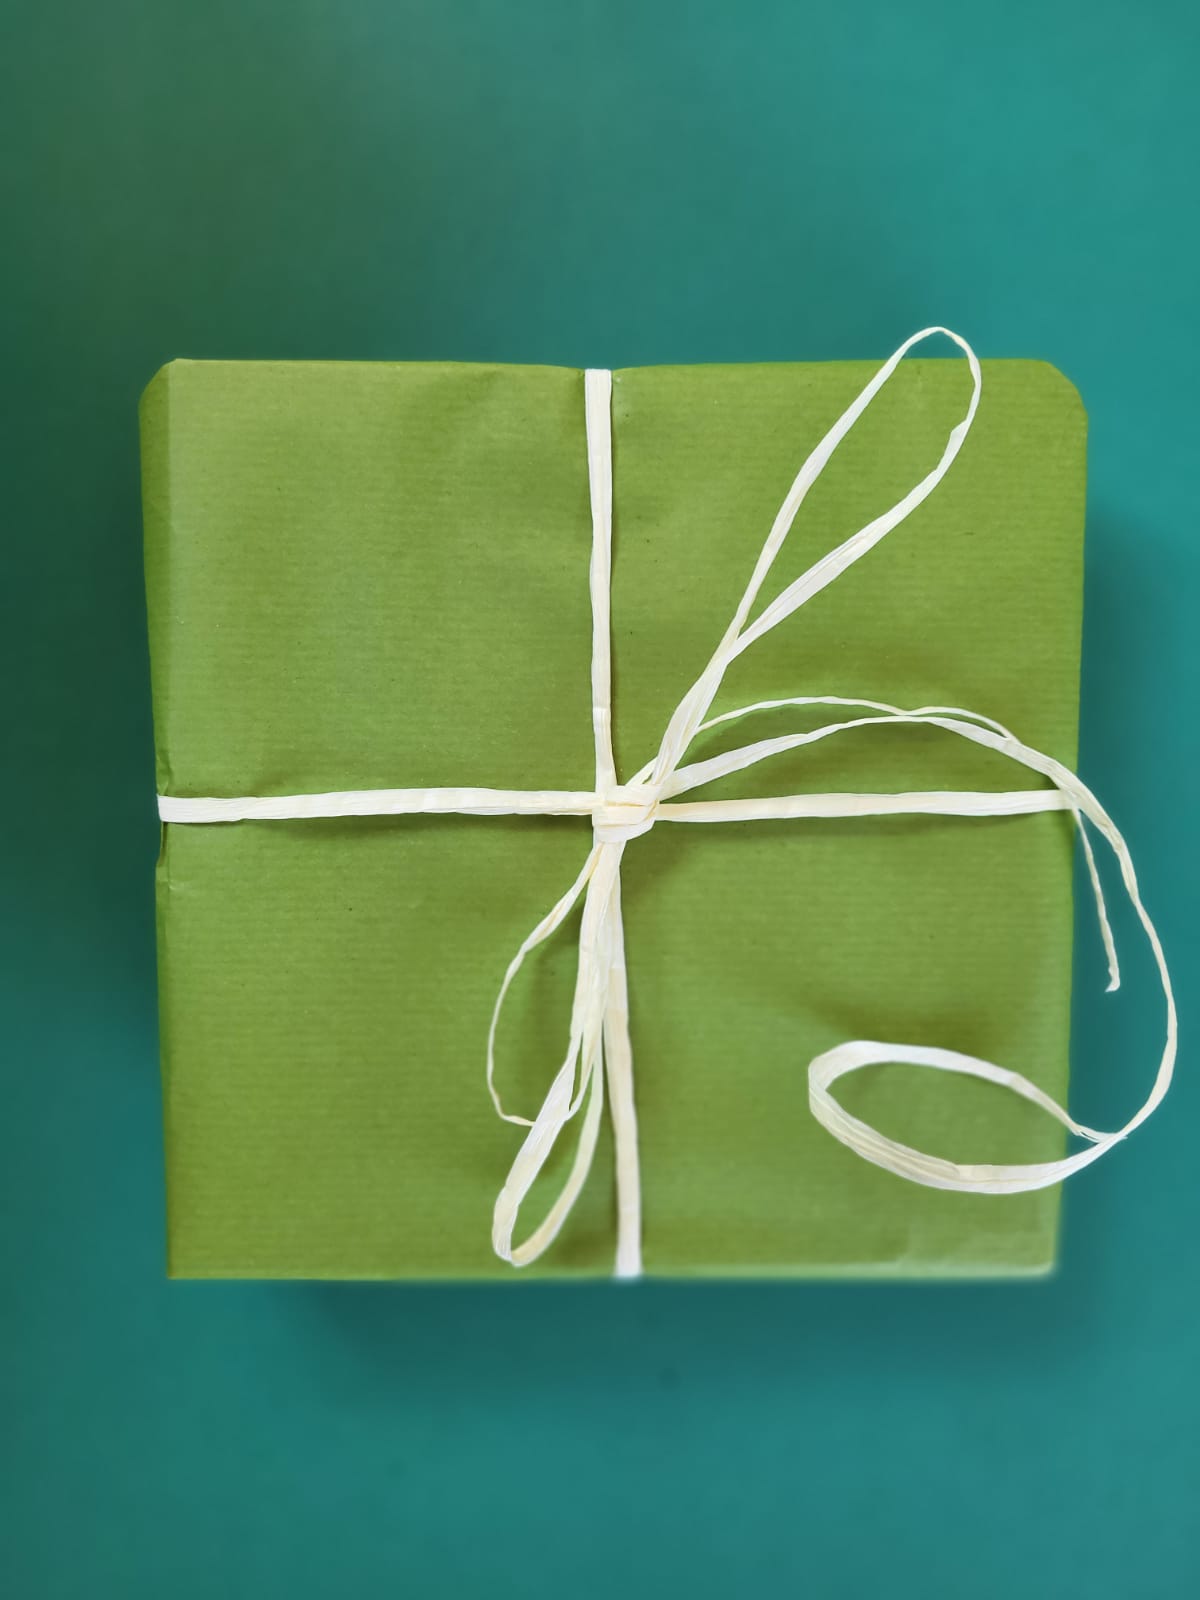 15-18 years 'Cooking Up a Campaign' Gift Wrapped Eco-Book Bundle